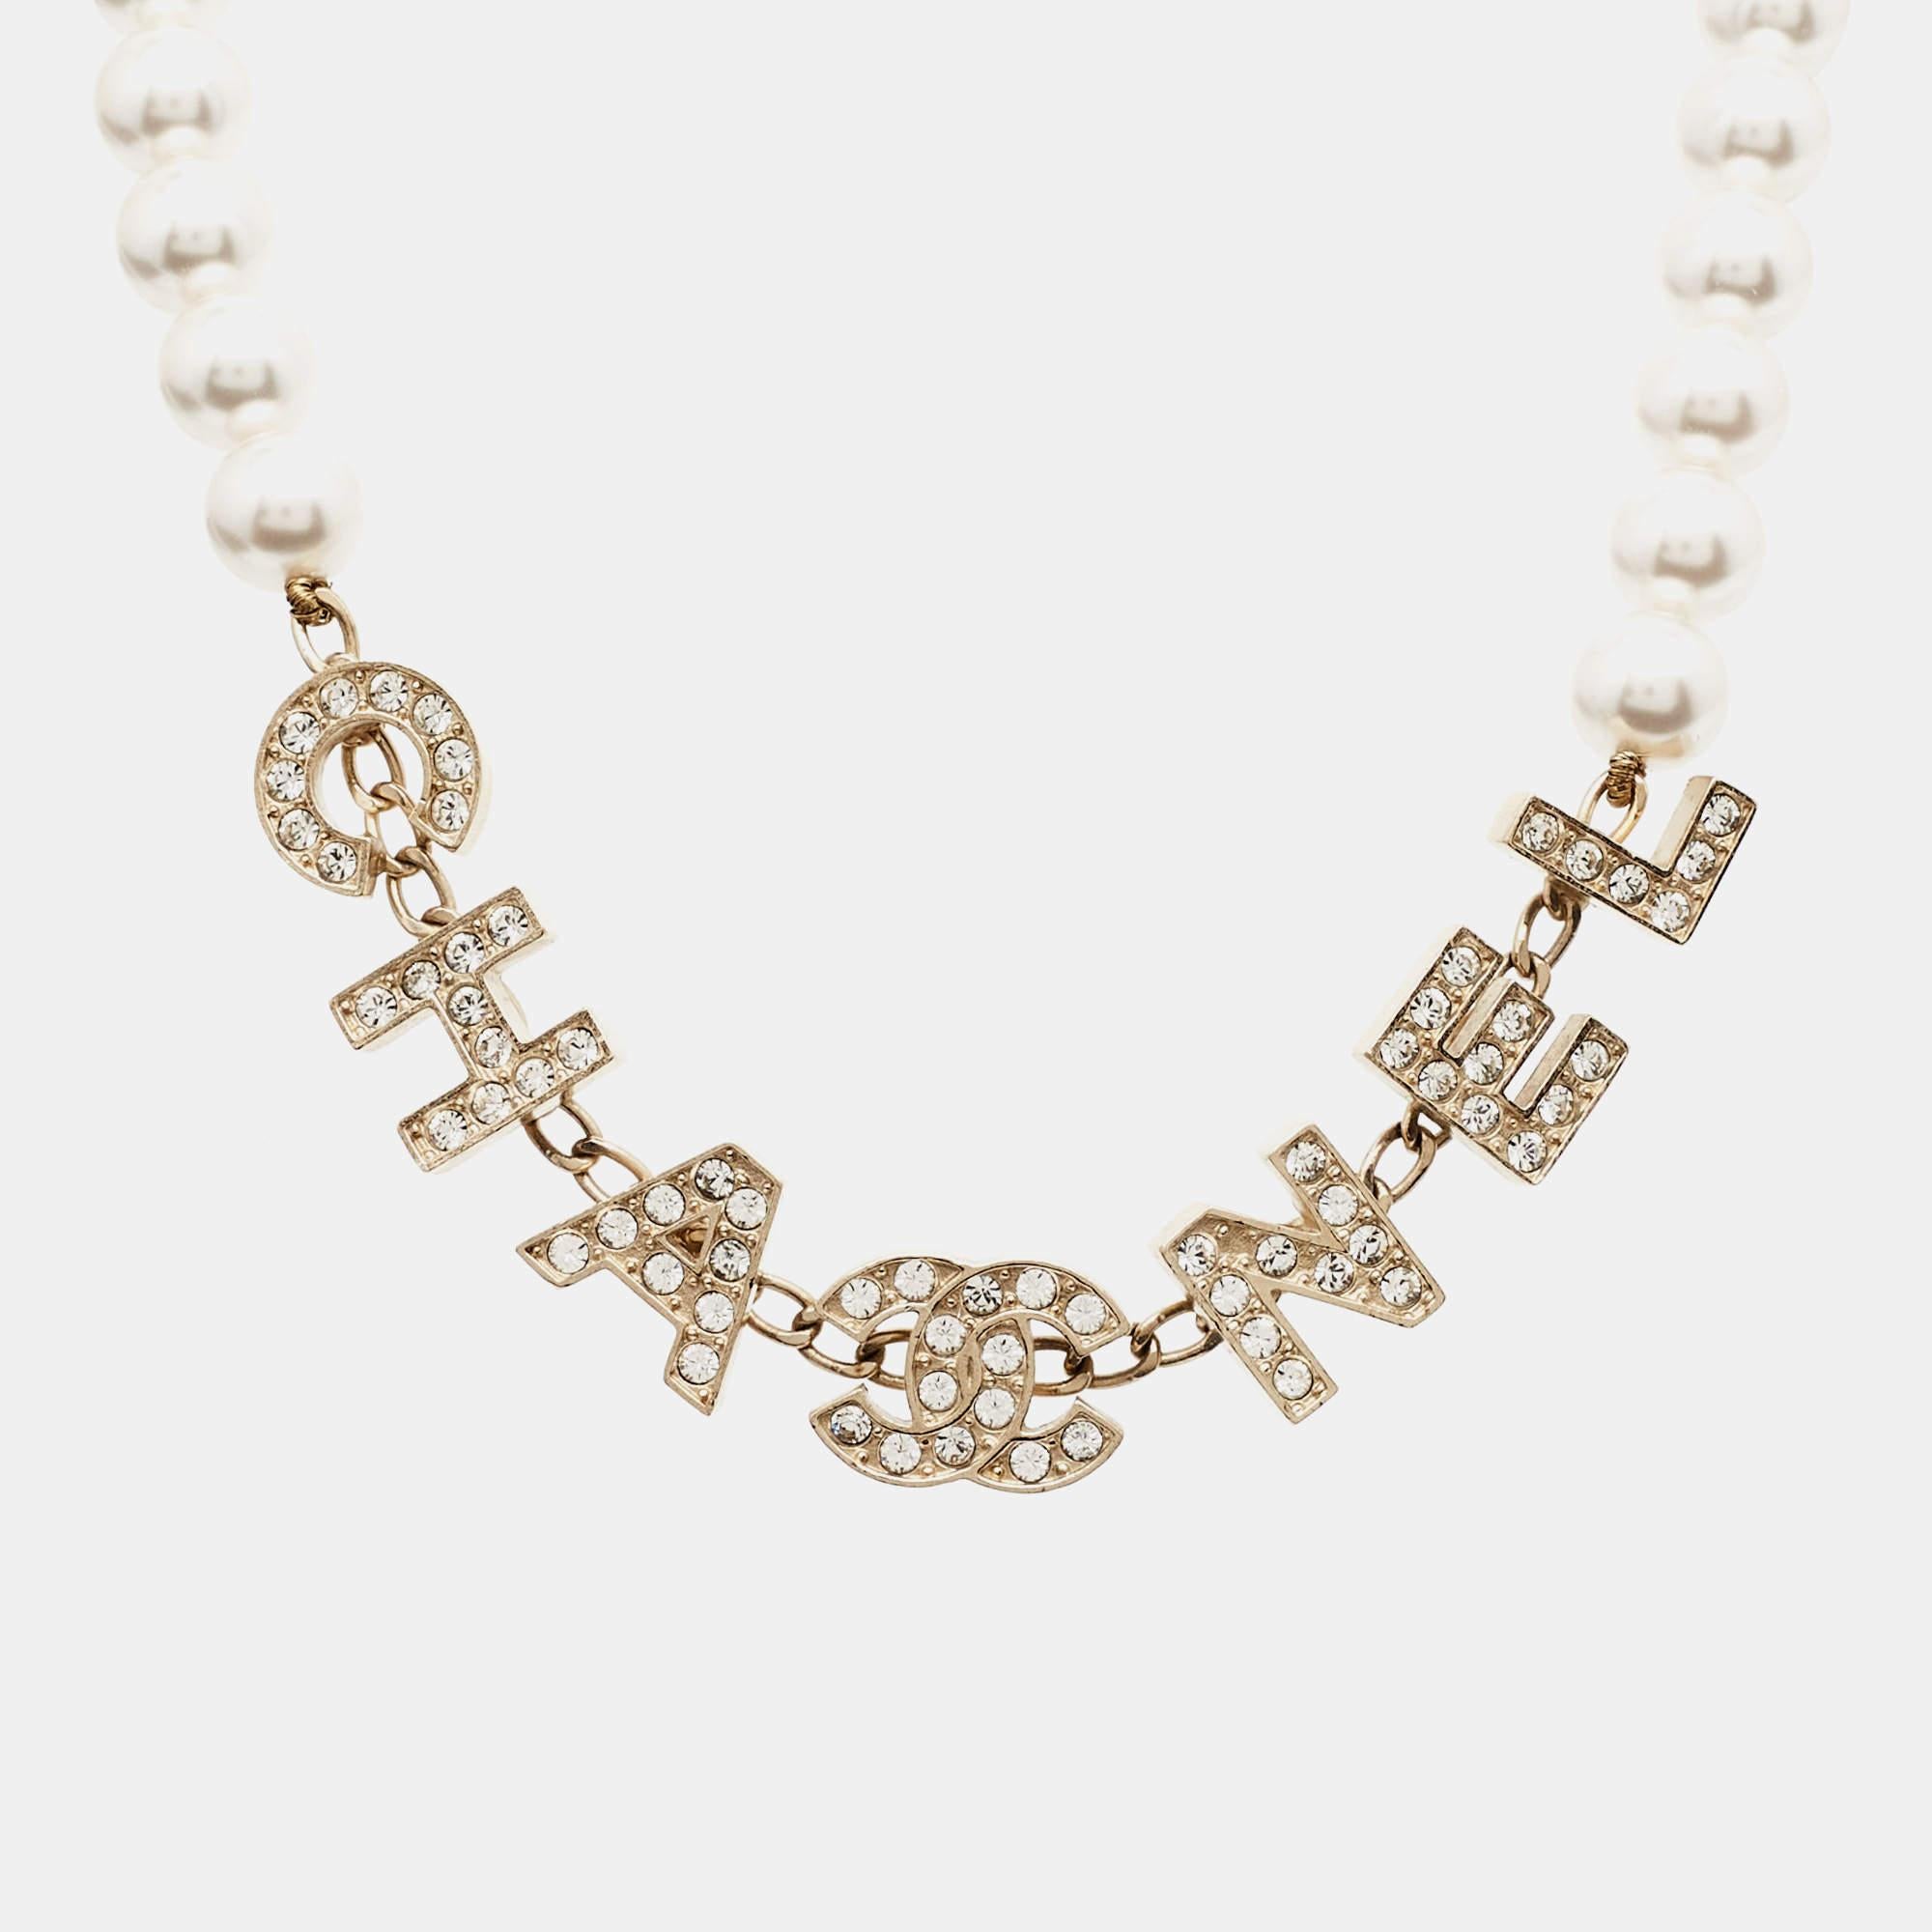 Define your neck with this Chanel faux pearl necklace. It is a masterfully crafted creation that promises to hold its beauty and value for a long time.

Includes: Original Box, Info Booklet

